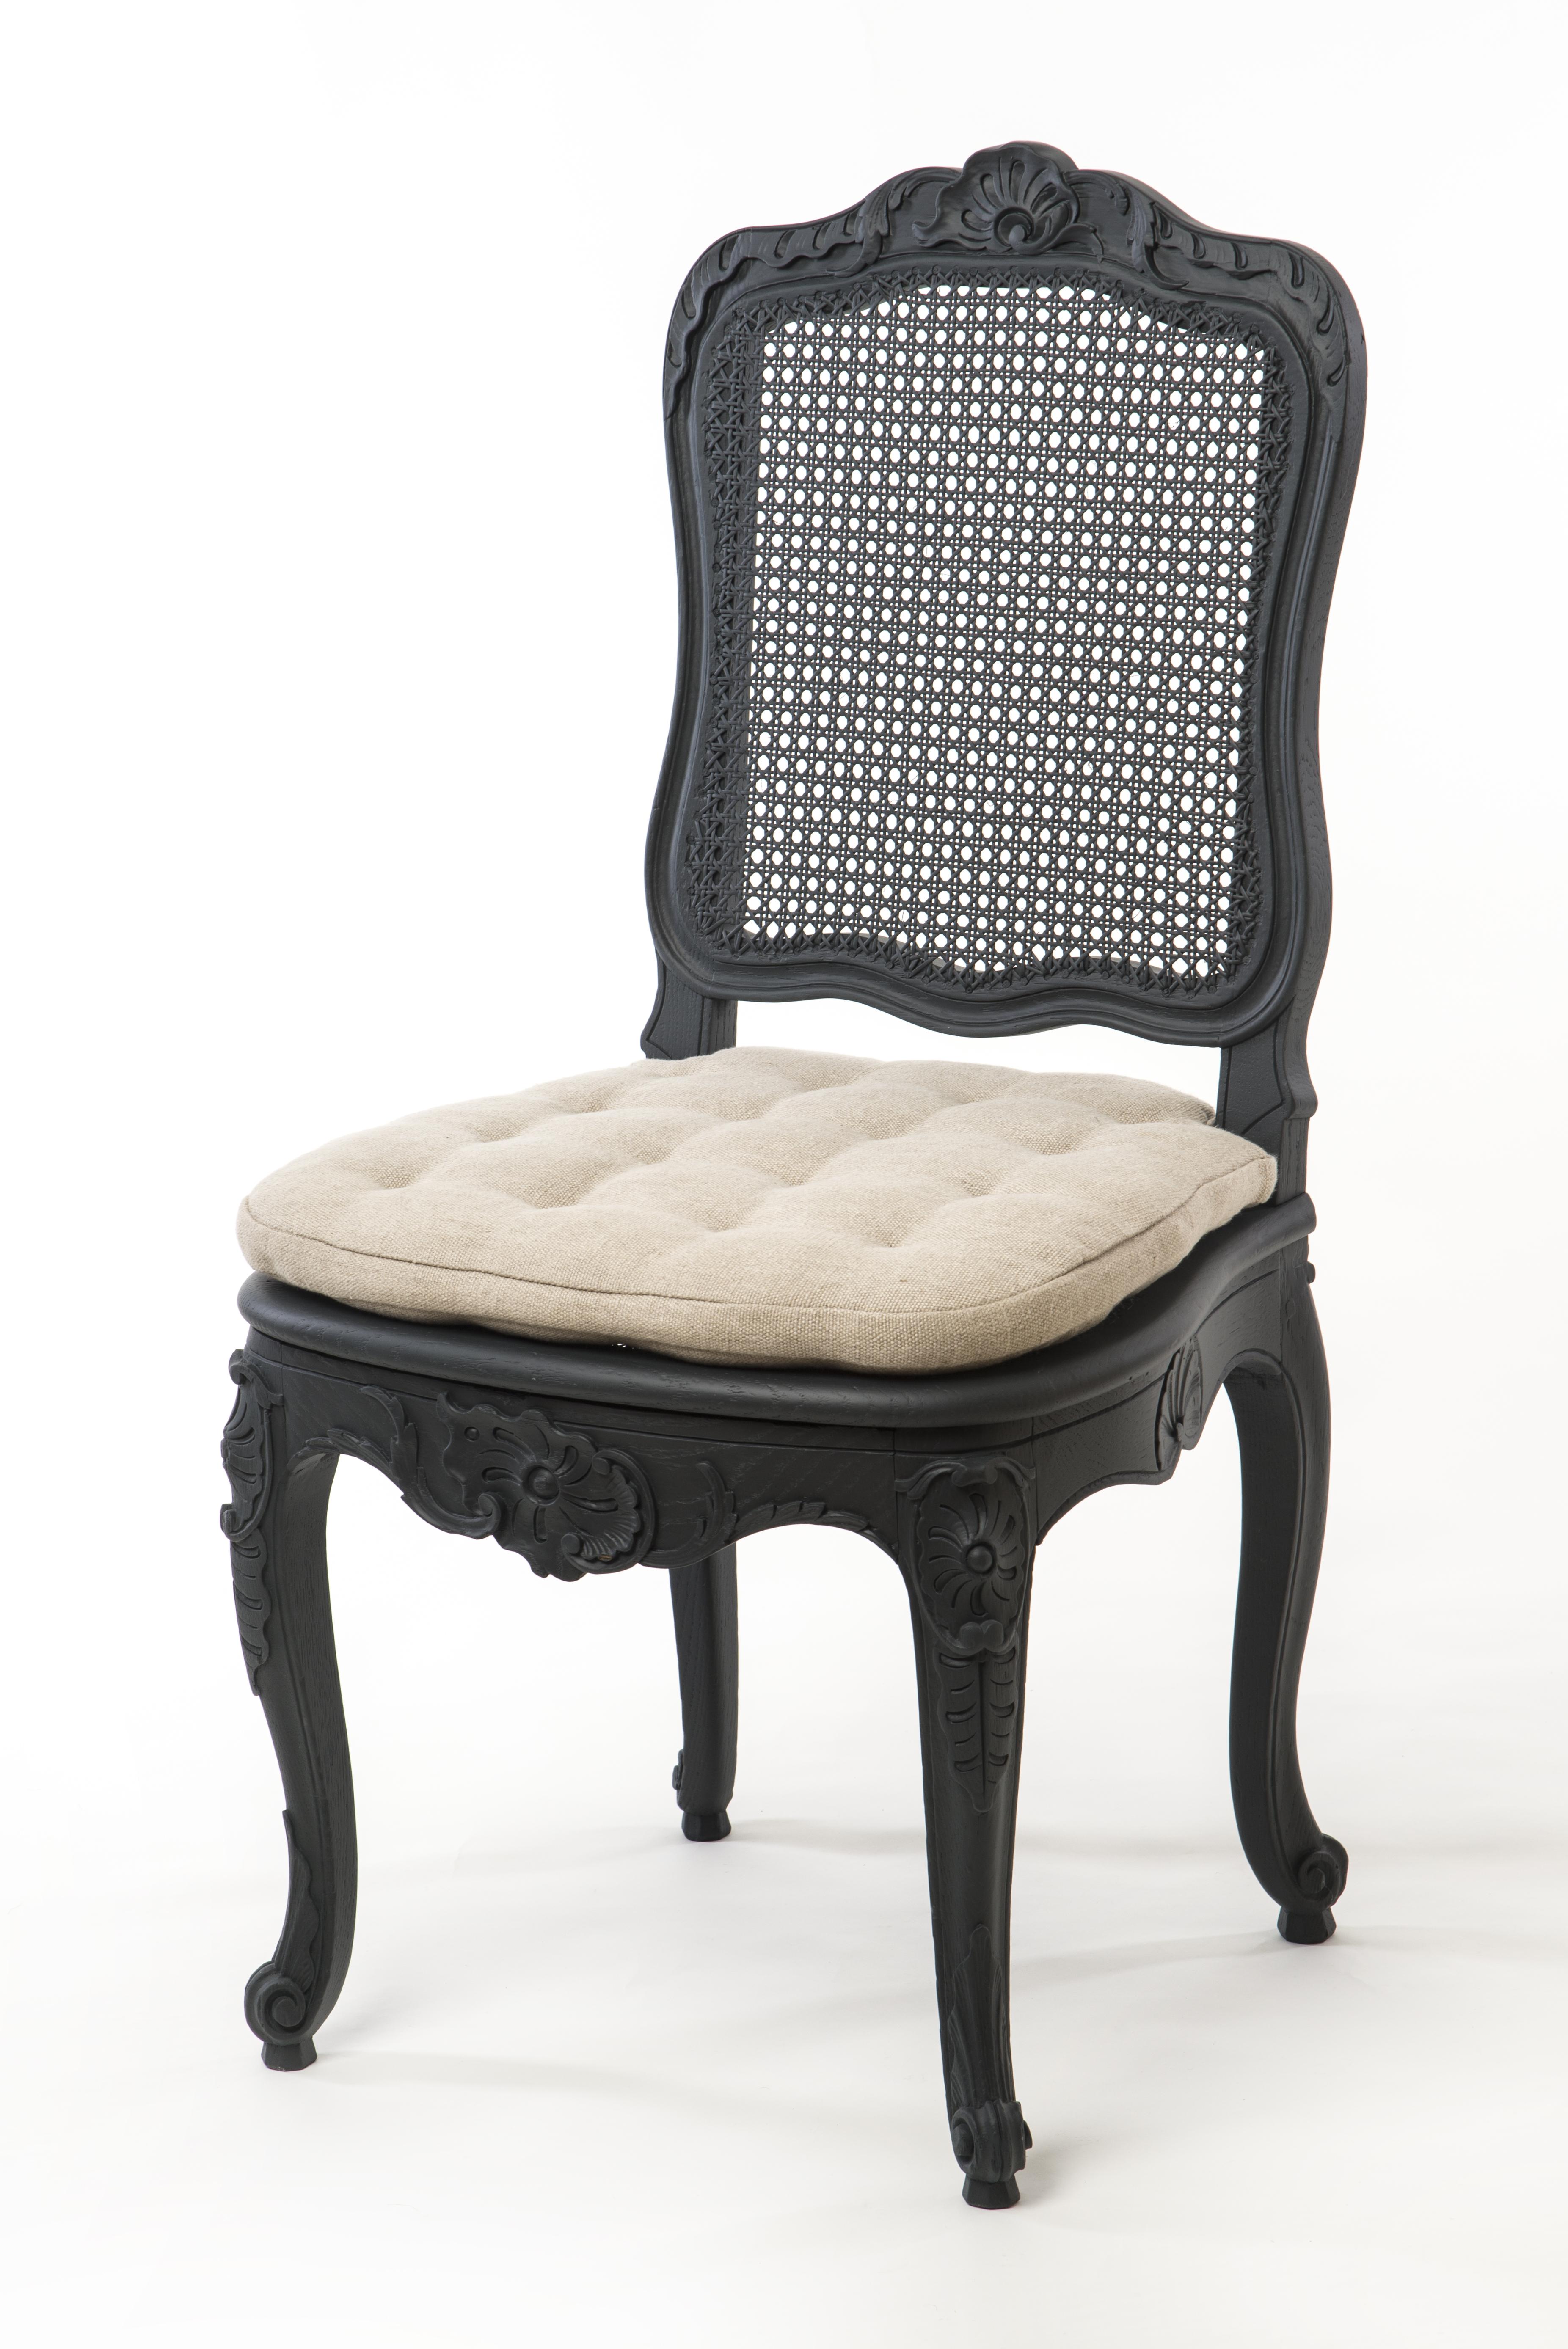 This set of 5 beautiful chairs in the Gustavian style come in an elegant black paint. The slightly curved legs as well as the seating frame and backrest feature sophisticated wood carvings that are truly setting these chairs apart. The wicker on